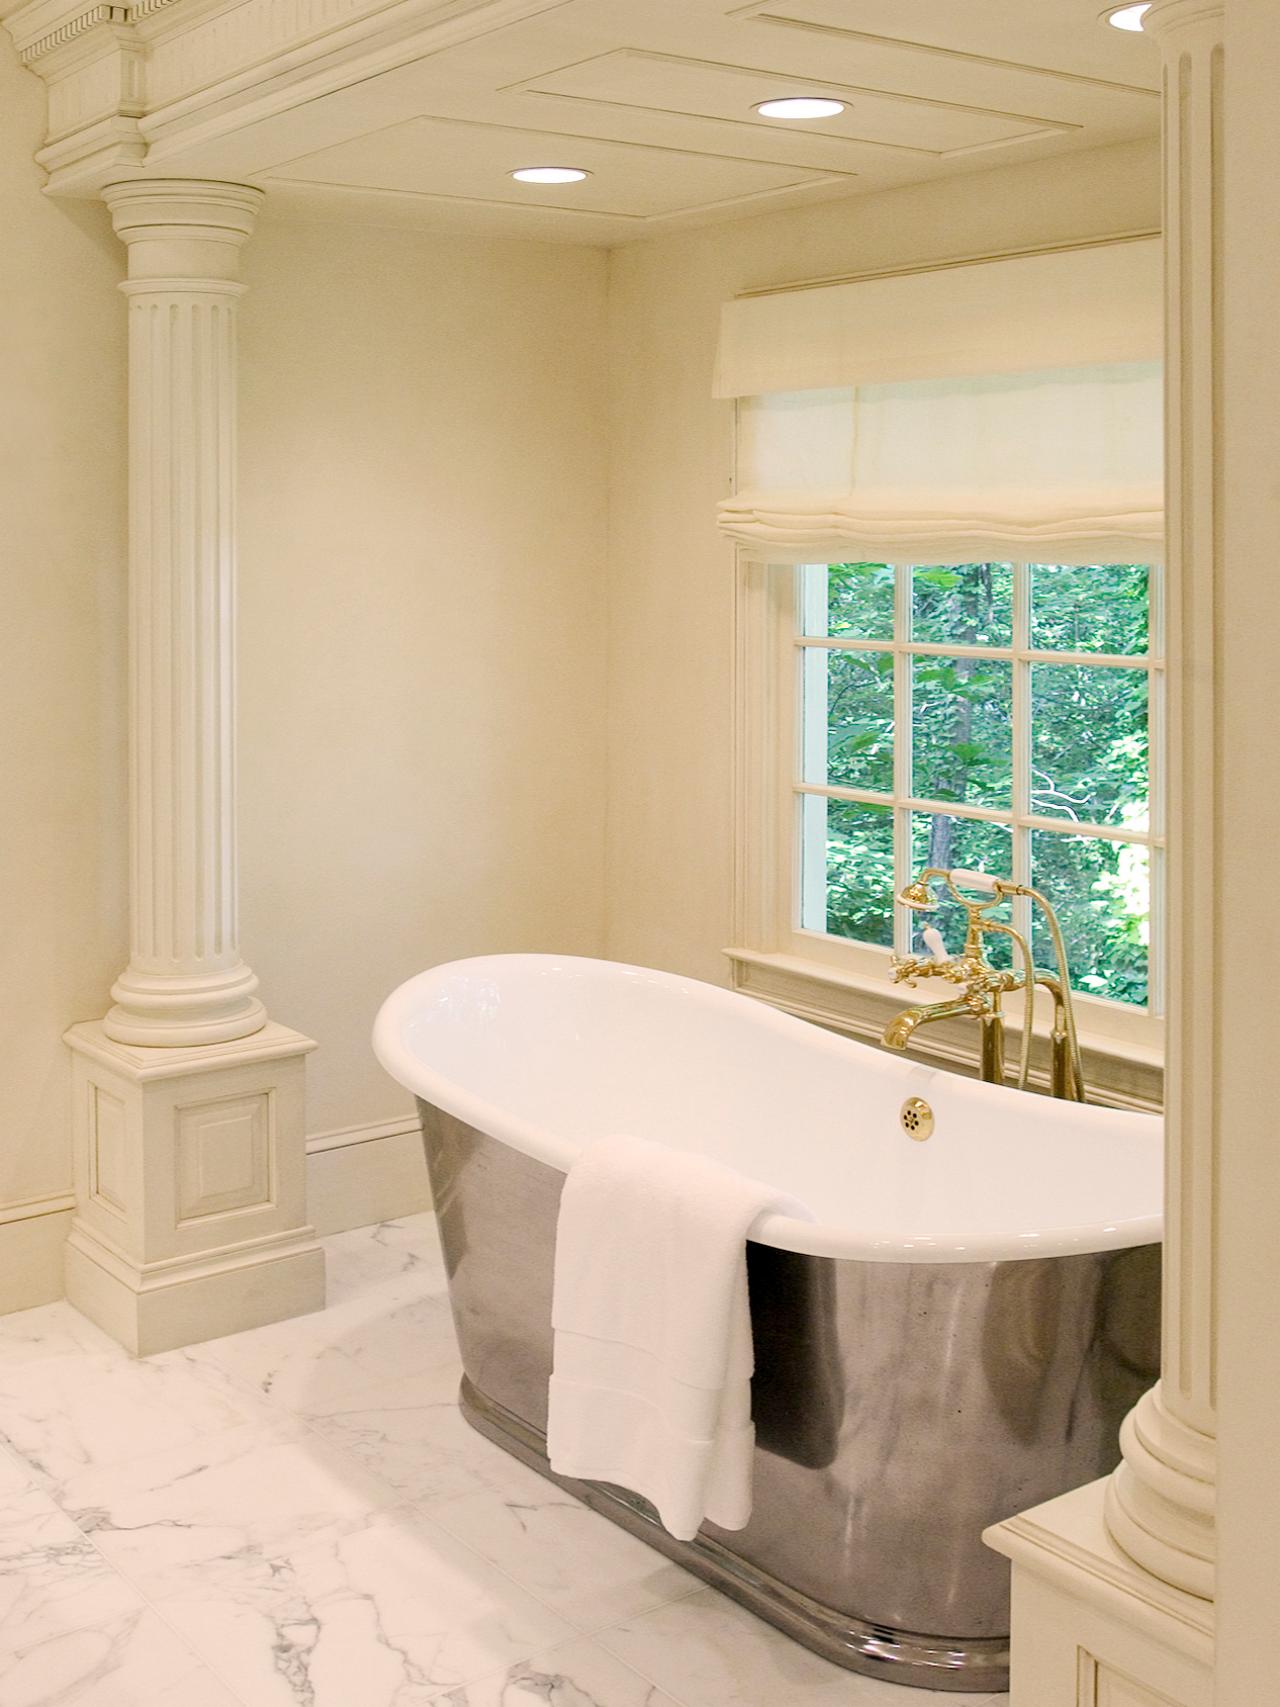 Soaking Tub Designs Pictures Ideas Tips From HGTV HGTV